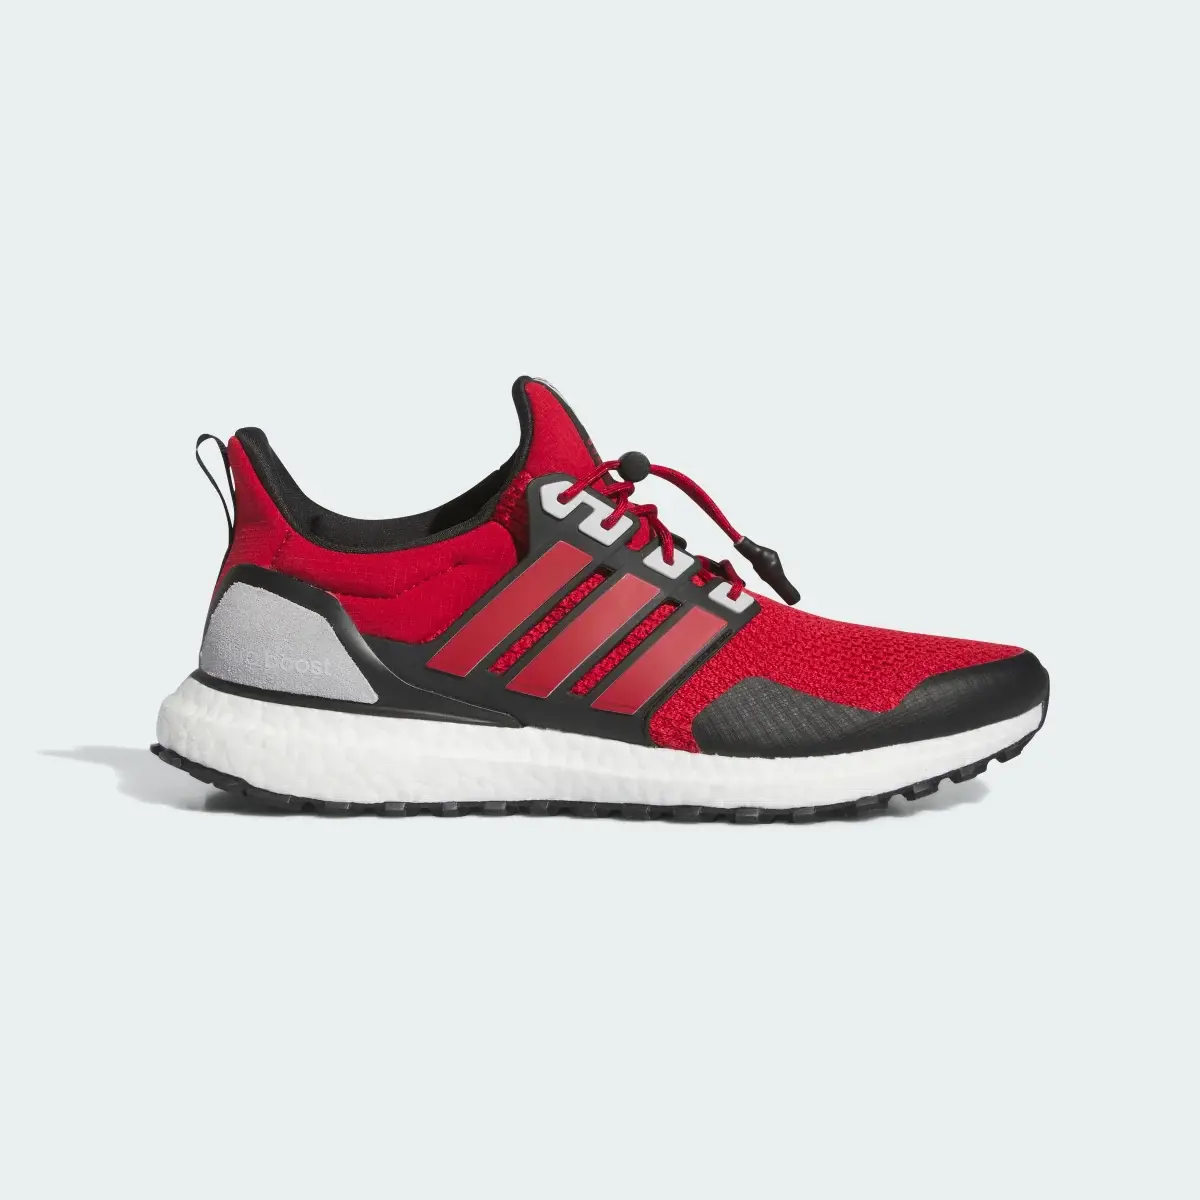 Adidas NC State Ultraboost 1.0 Shoes. 2